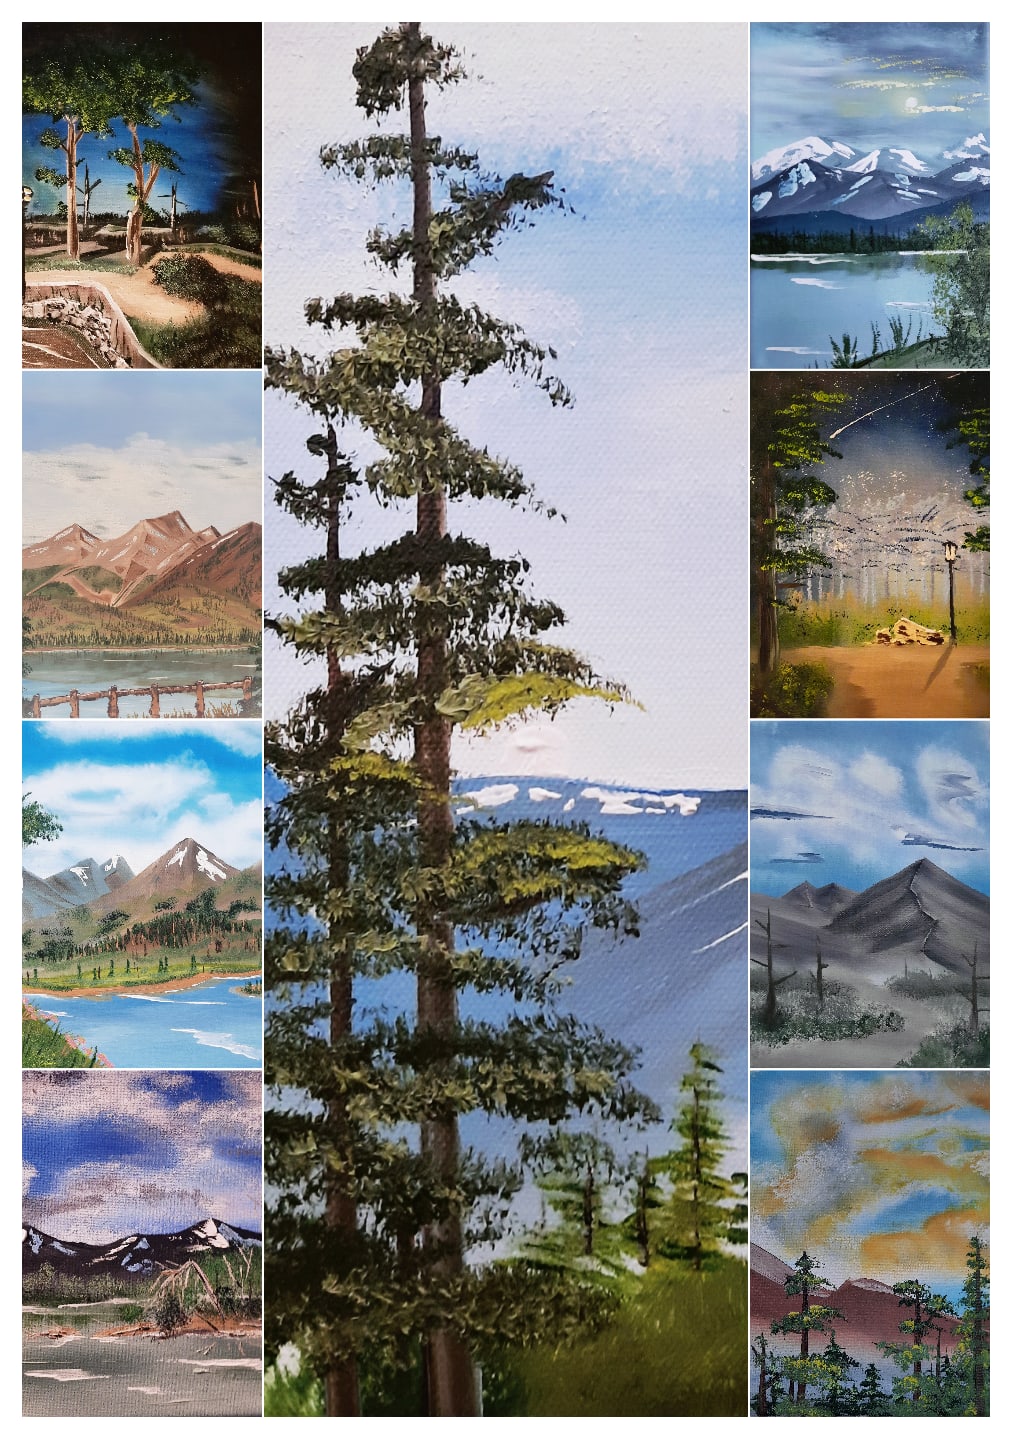 9 of my Plein Air oil paintings from my trip to CO in a collage 🙌